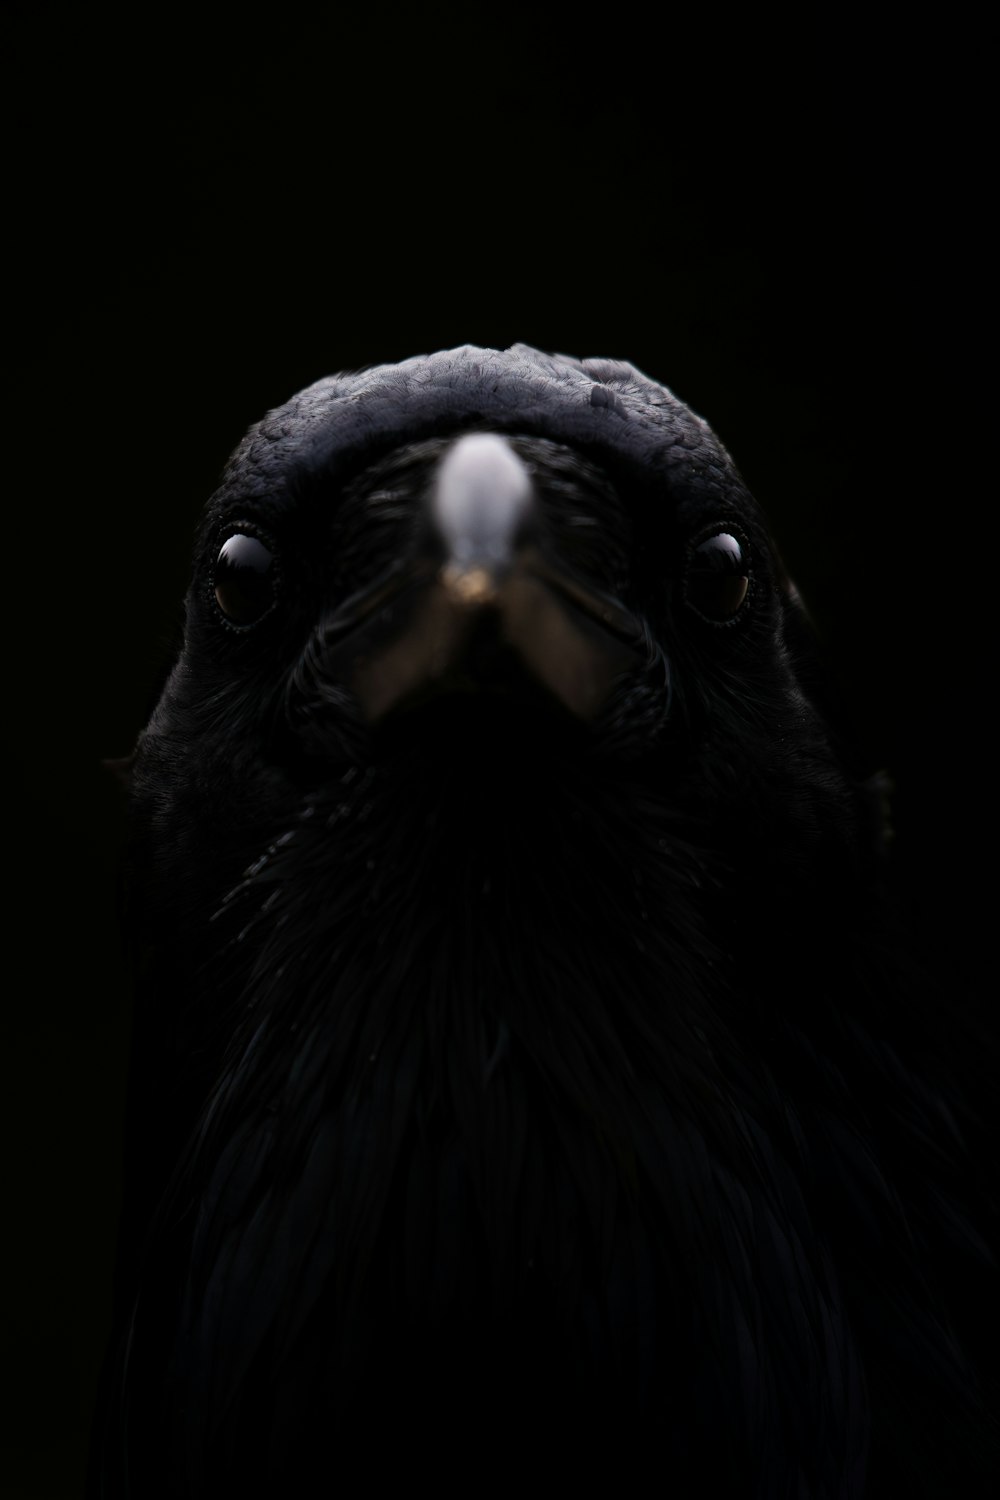 a close up of a black bird on a black background